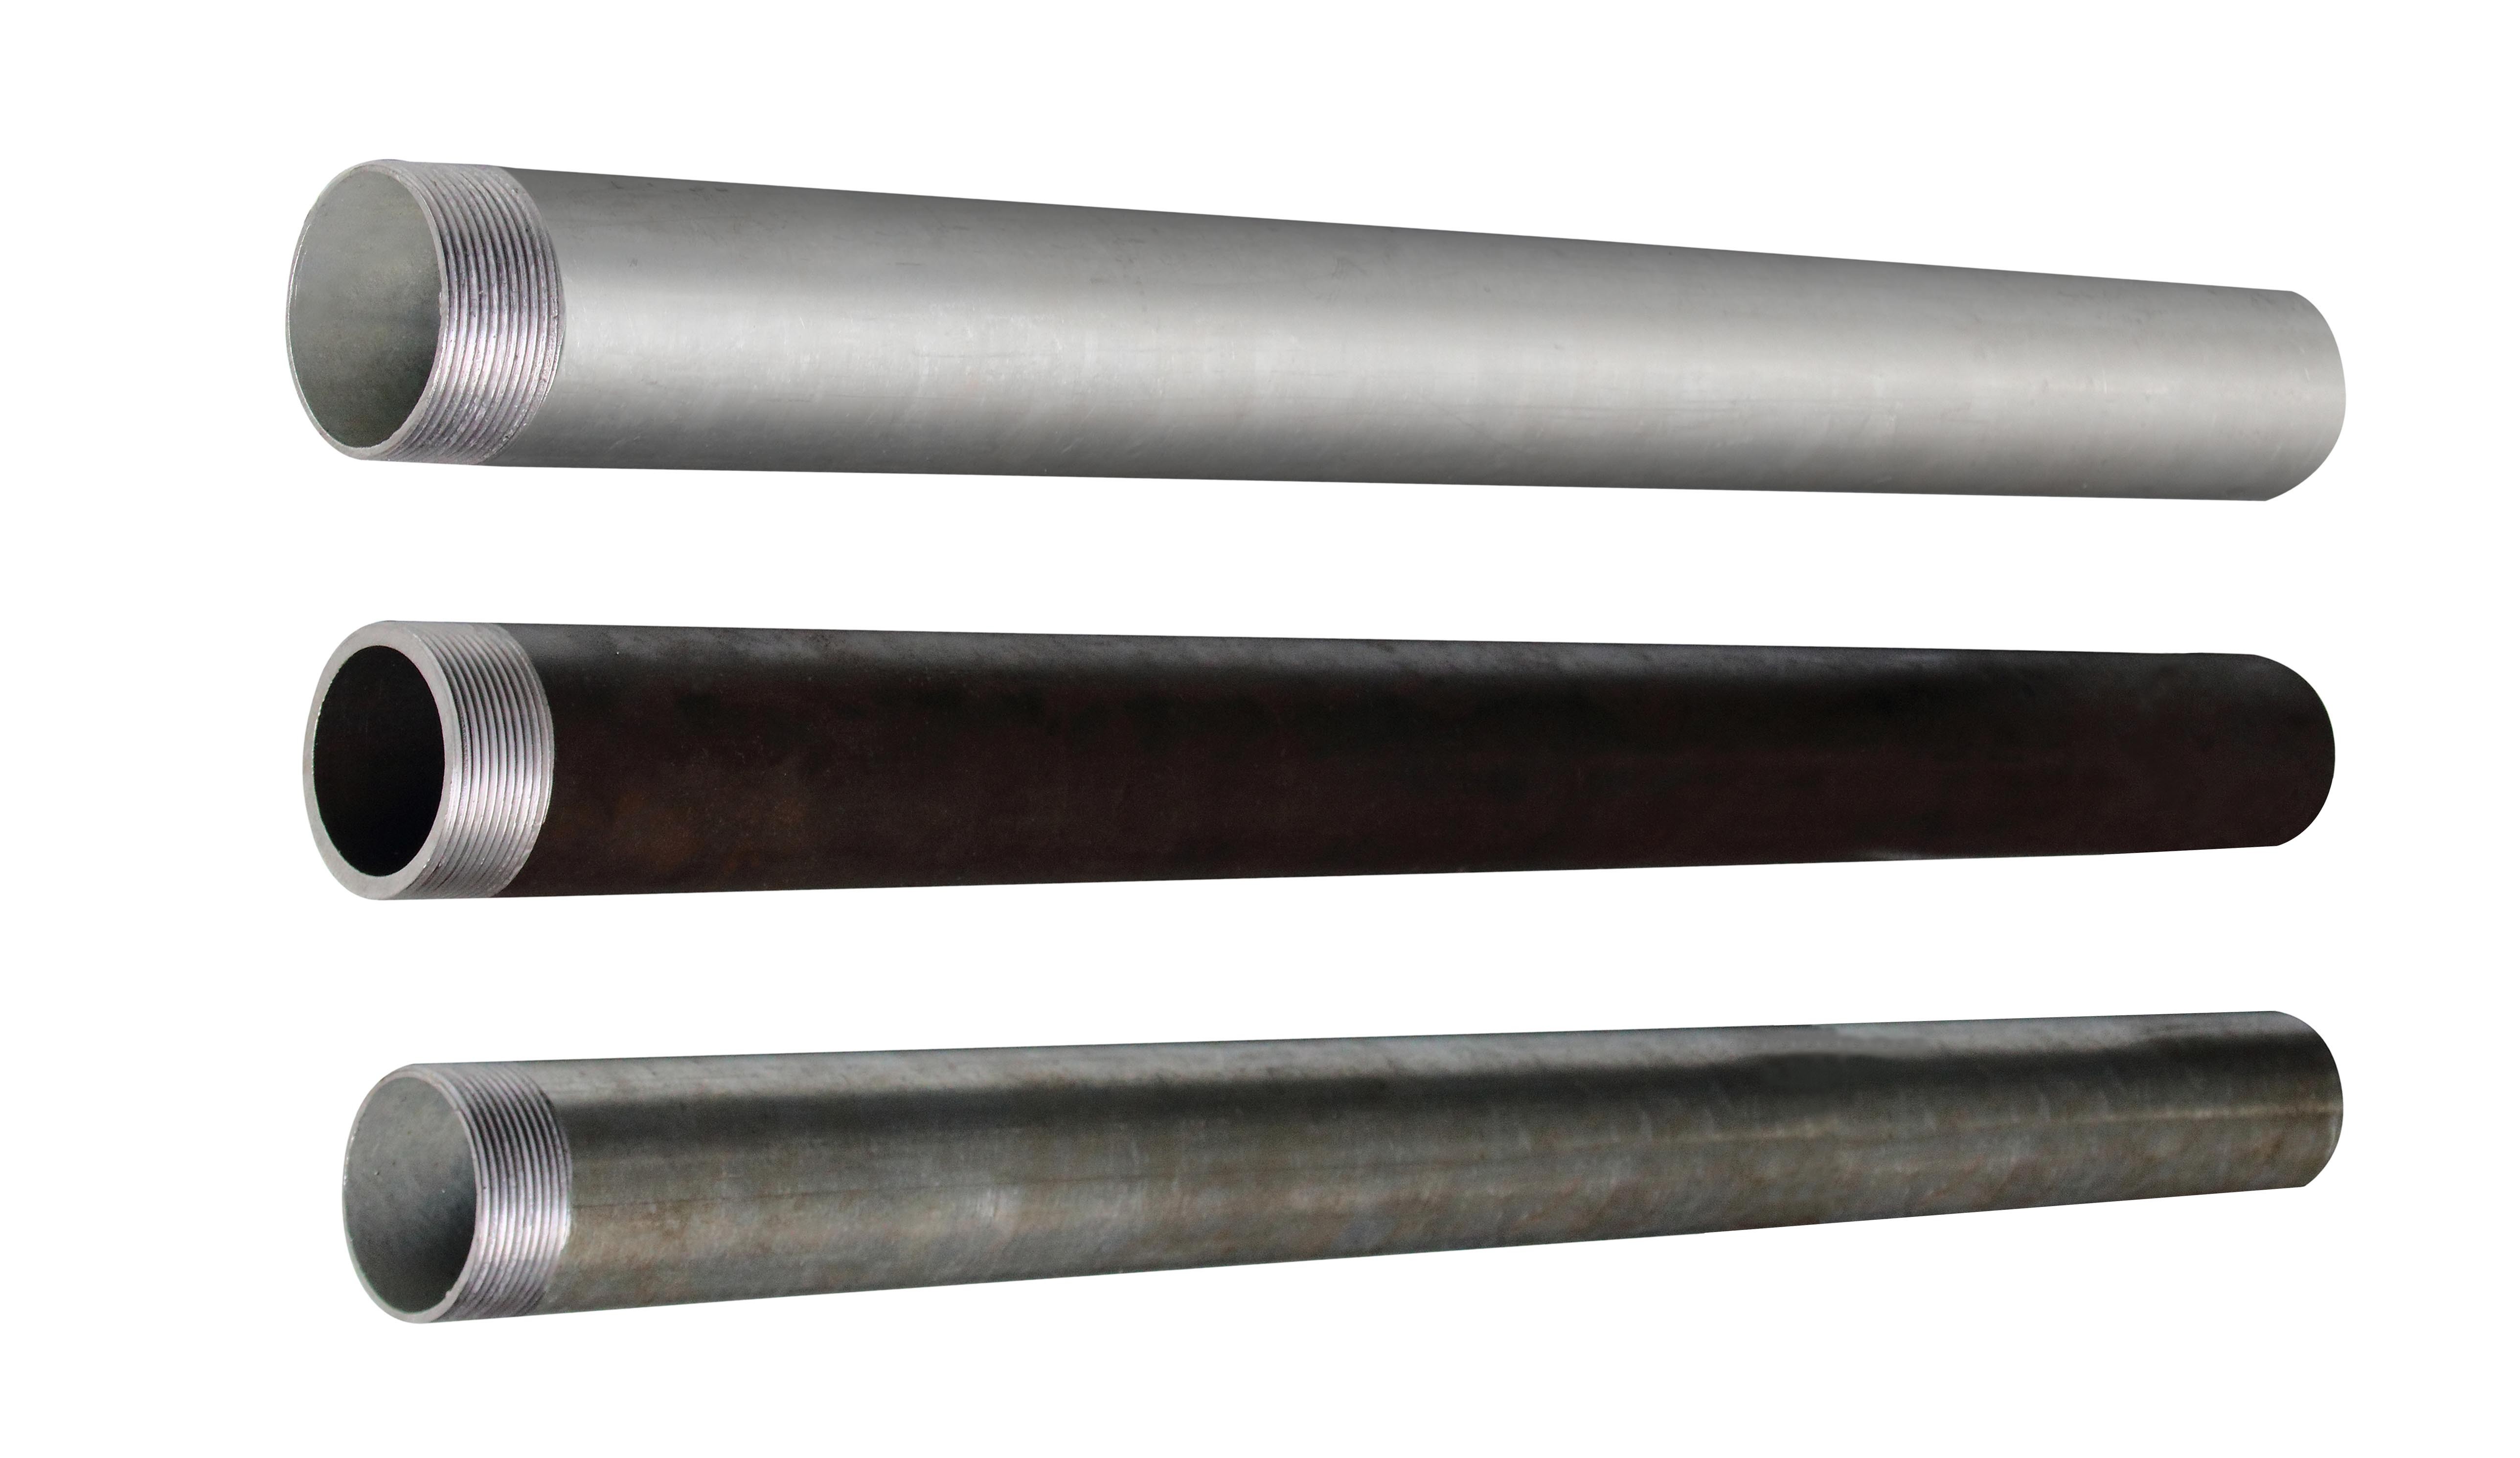 Stainless Steel pipes, and Black Iron pipes